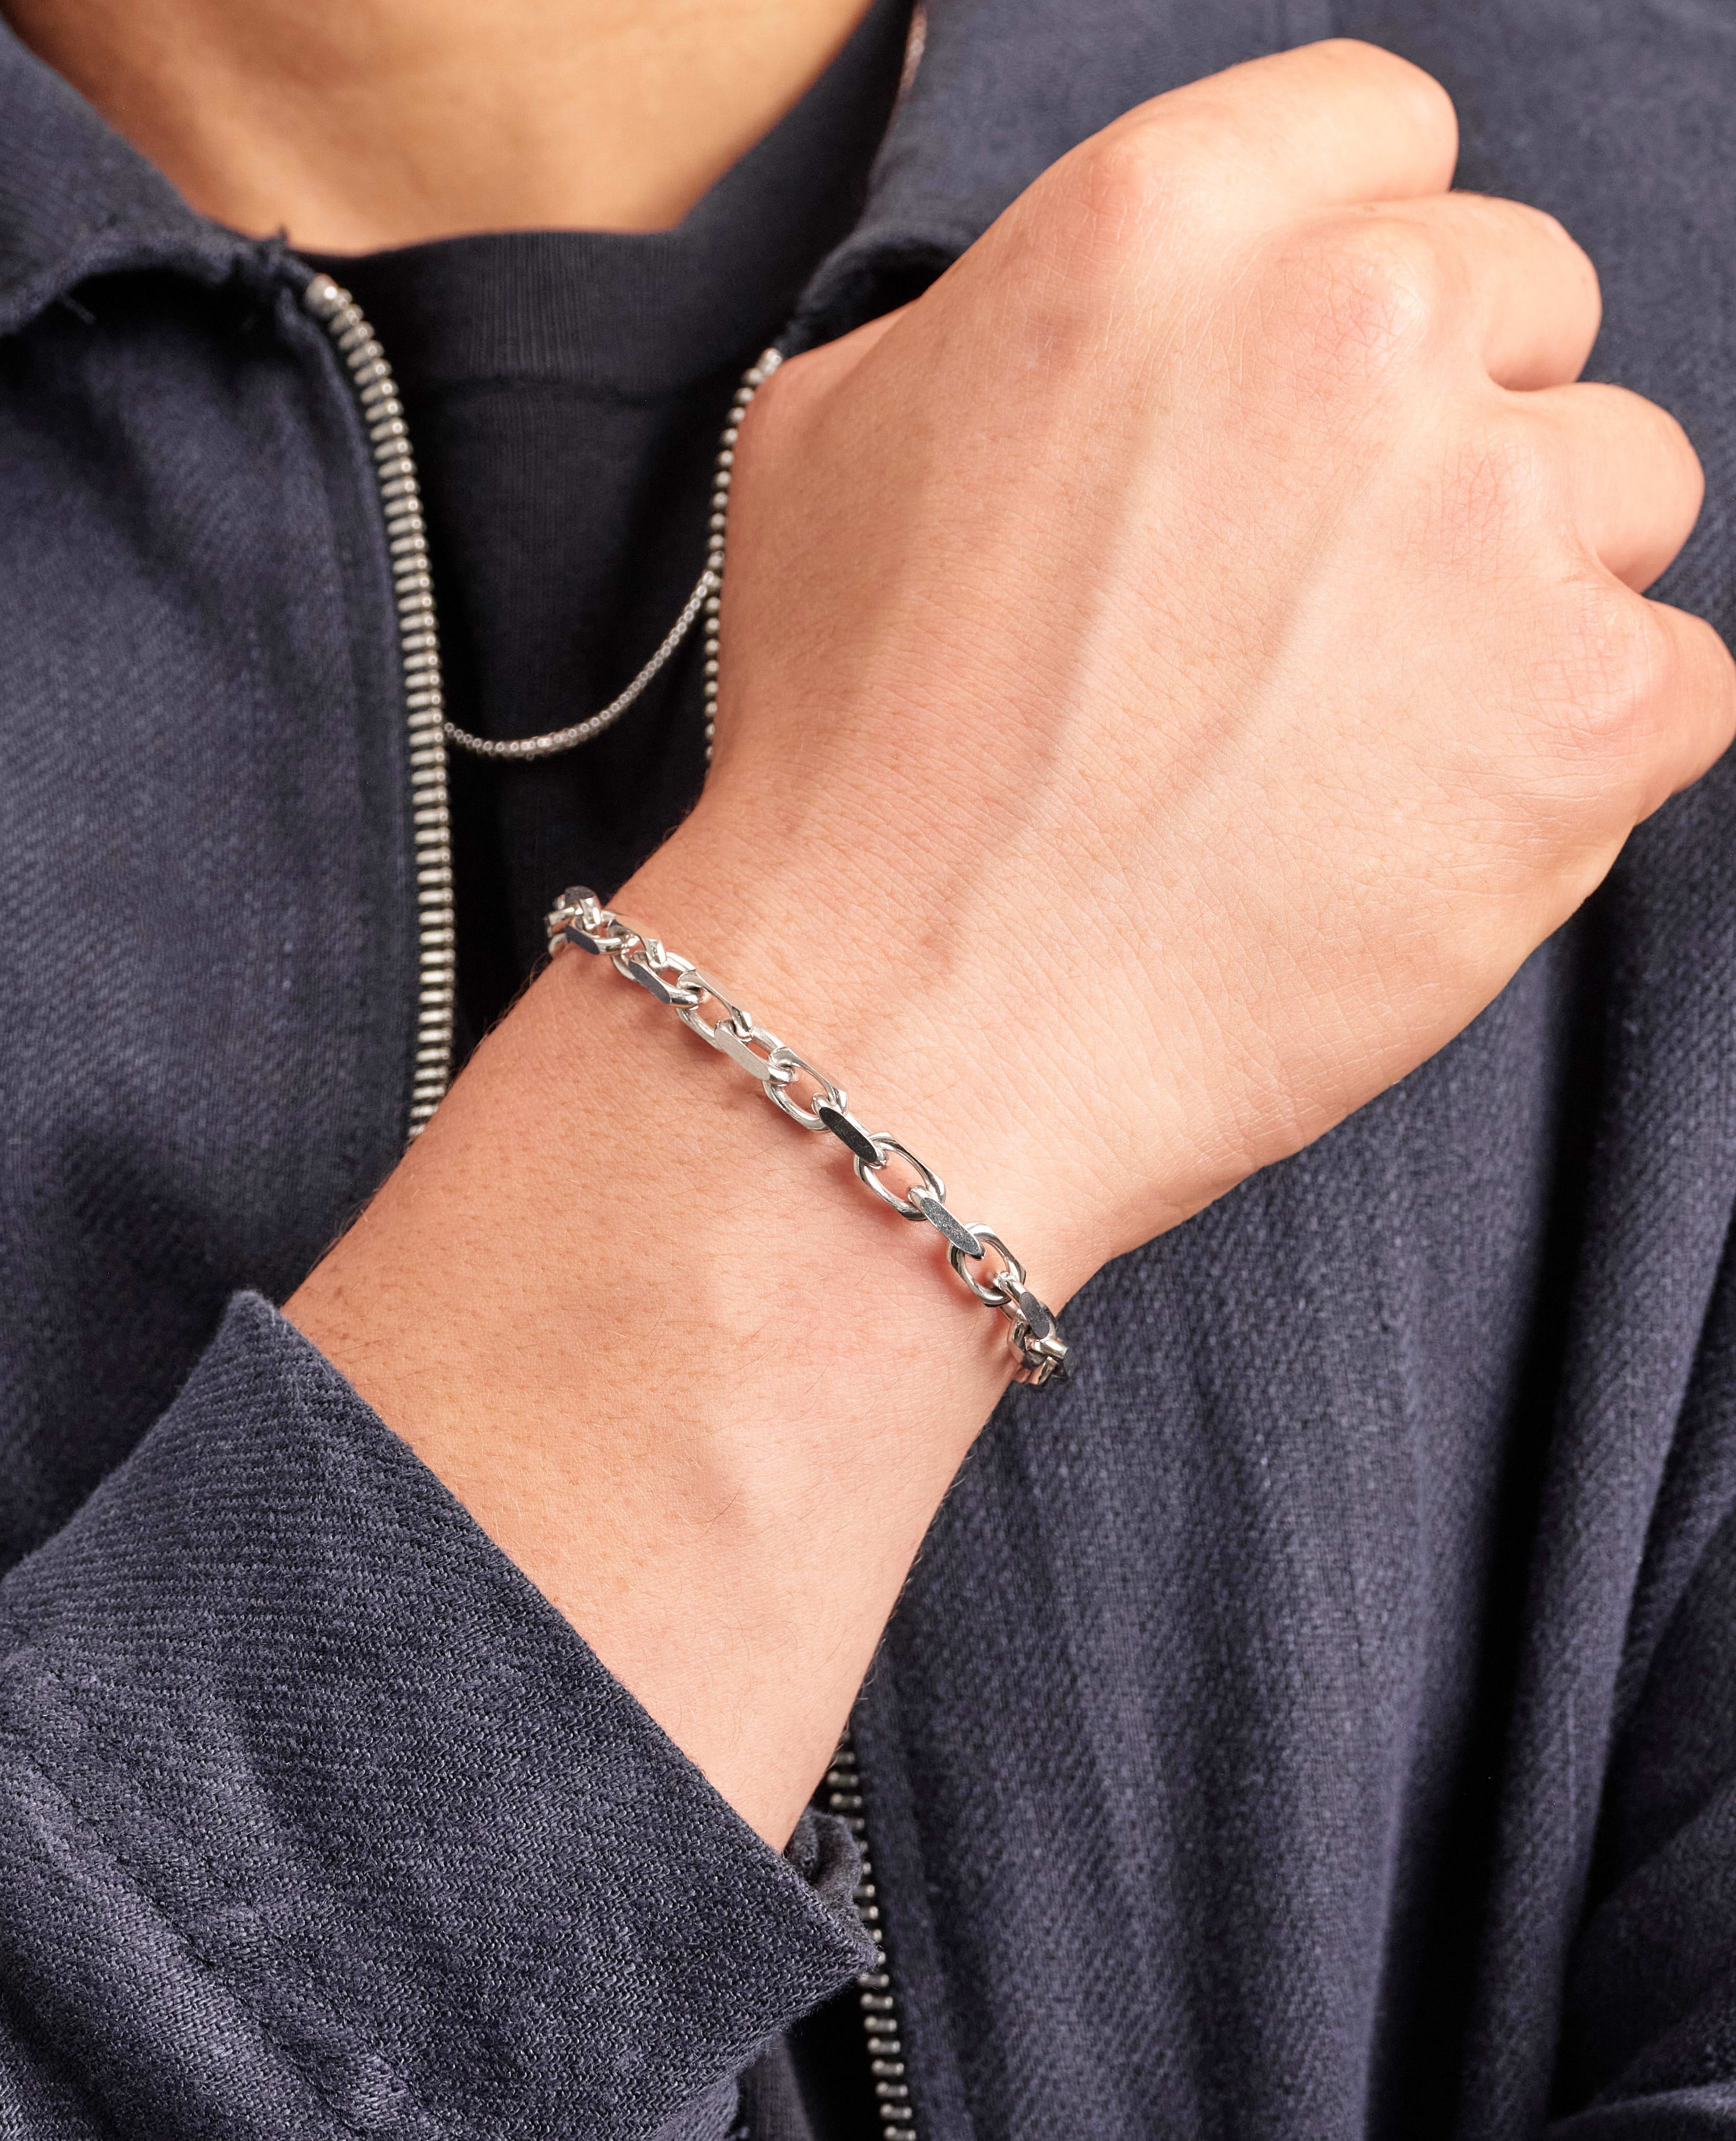 Image Cable Bracelet - 6mm Silver - Crafted in Italy